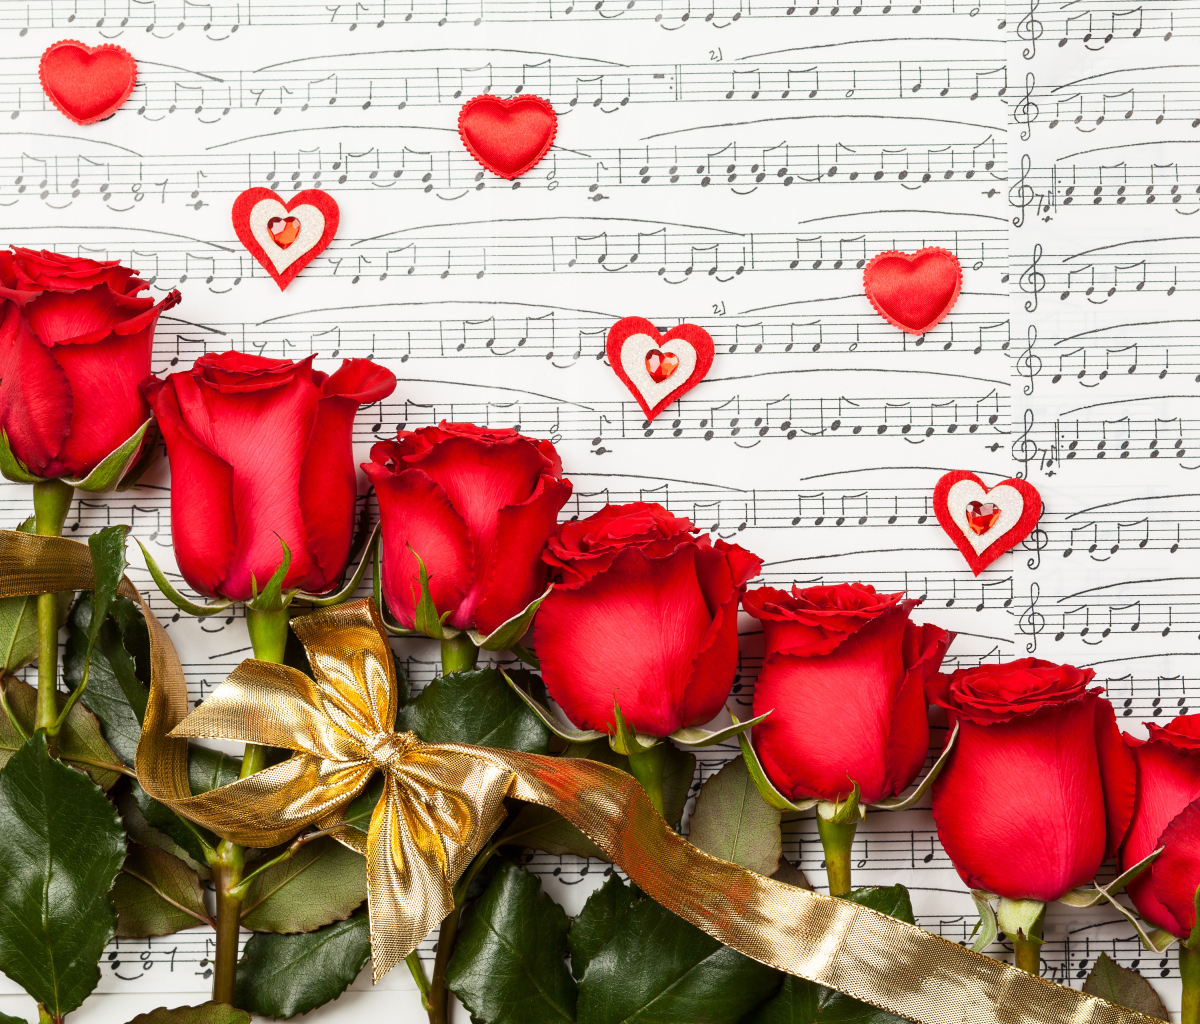 Roses, Love And Music wallpaper 1200x1024